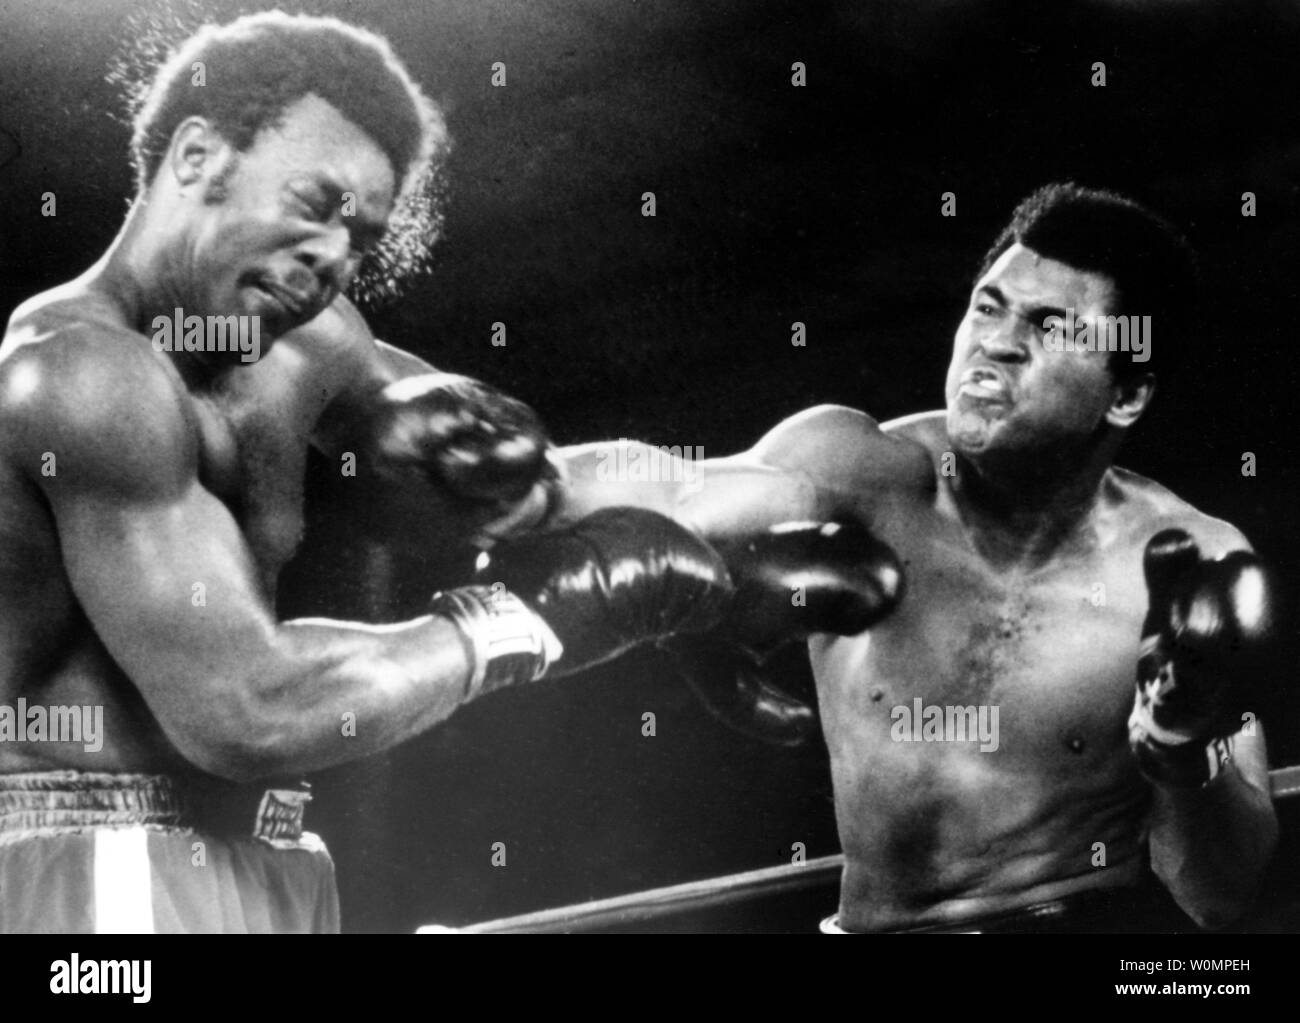 Boxing great Muhammad Ali died at the age of 74 in Phoenix, Arizona on Saturday, June 4, 2016.  He is shown punching  George Foreman with a hard right during their heavyweight title bout on October 29, 1974 in Kinshasa, Zaire. In the fight of the year, Ali knocked Foreman out in the 8th round to regain his heavyweight crown.  File Photo by Mike Feldman/UPI Stock Photo